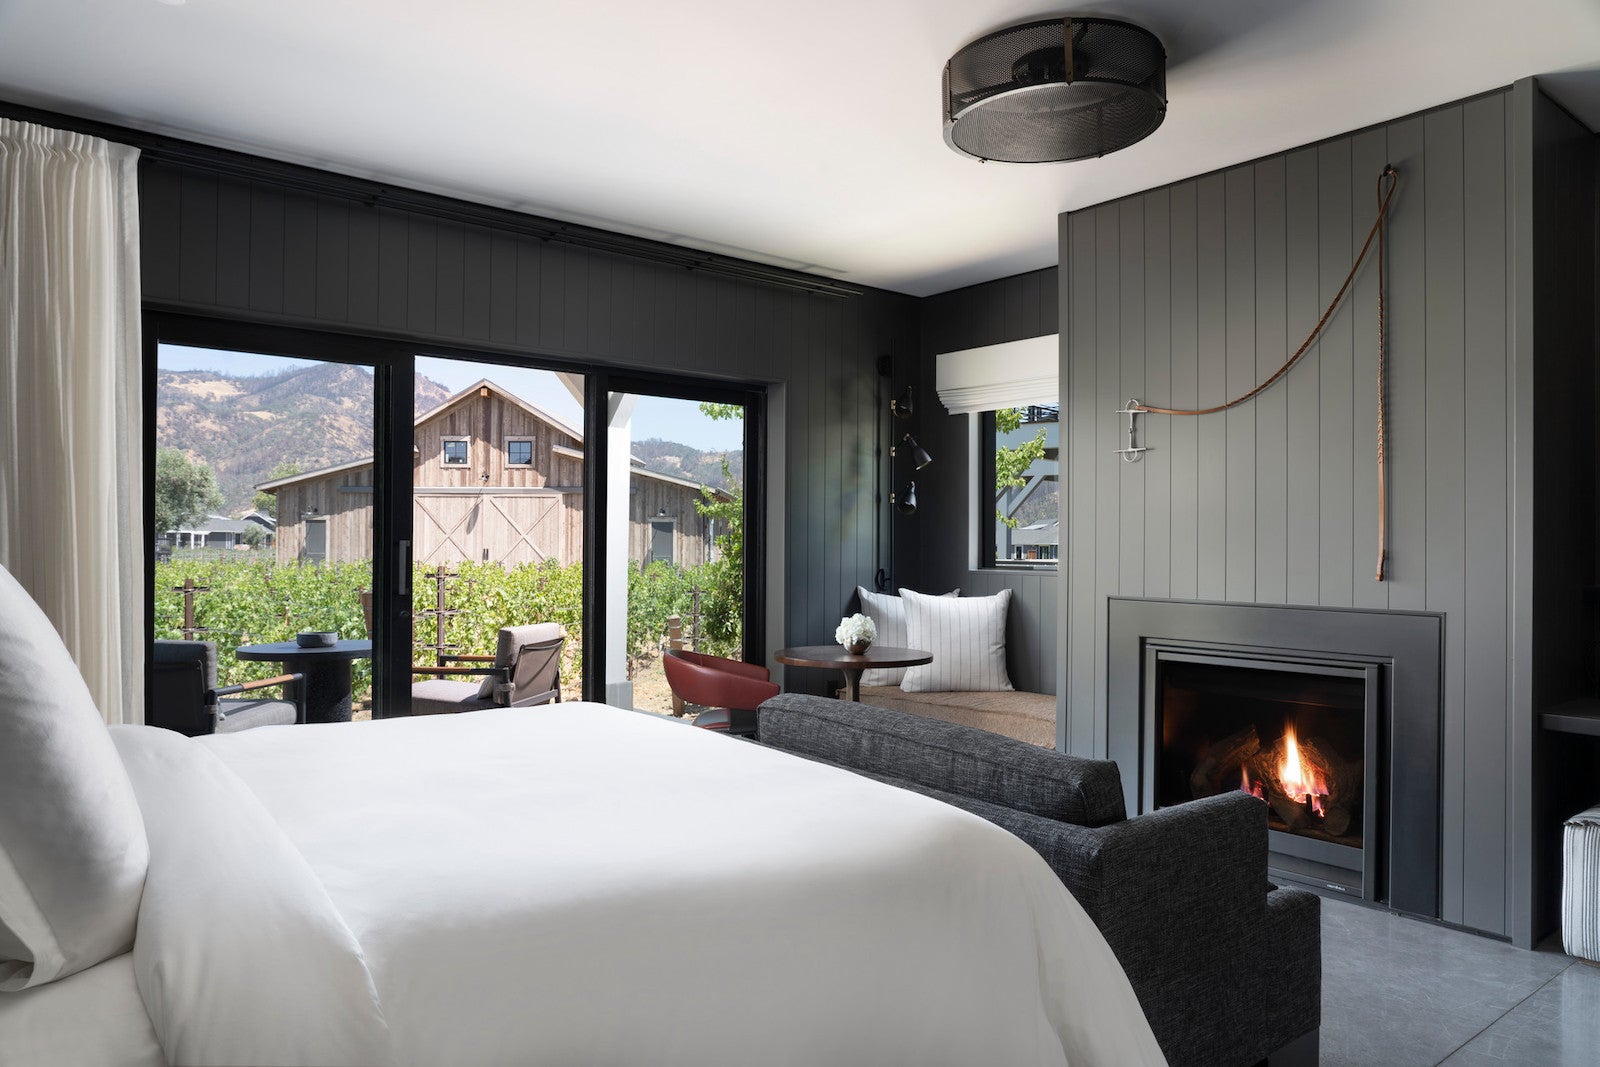 large hotel room with dark wood fireplace, large white bed, and windows looking out onto vineyard and wooden barn